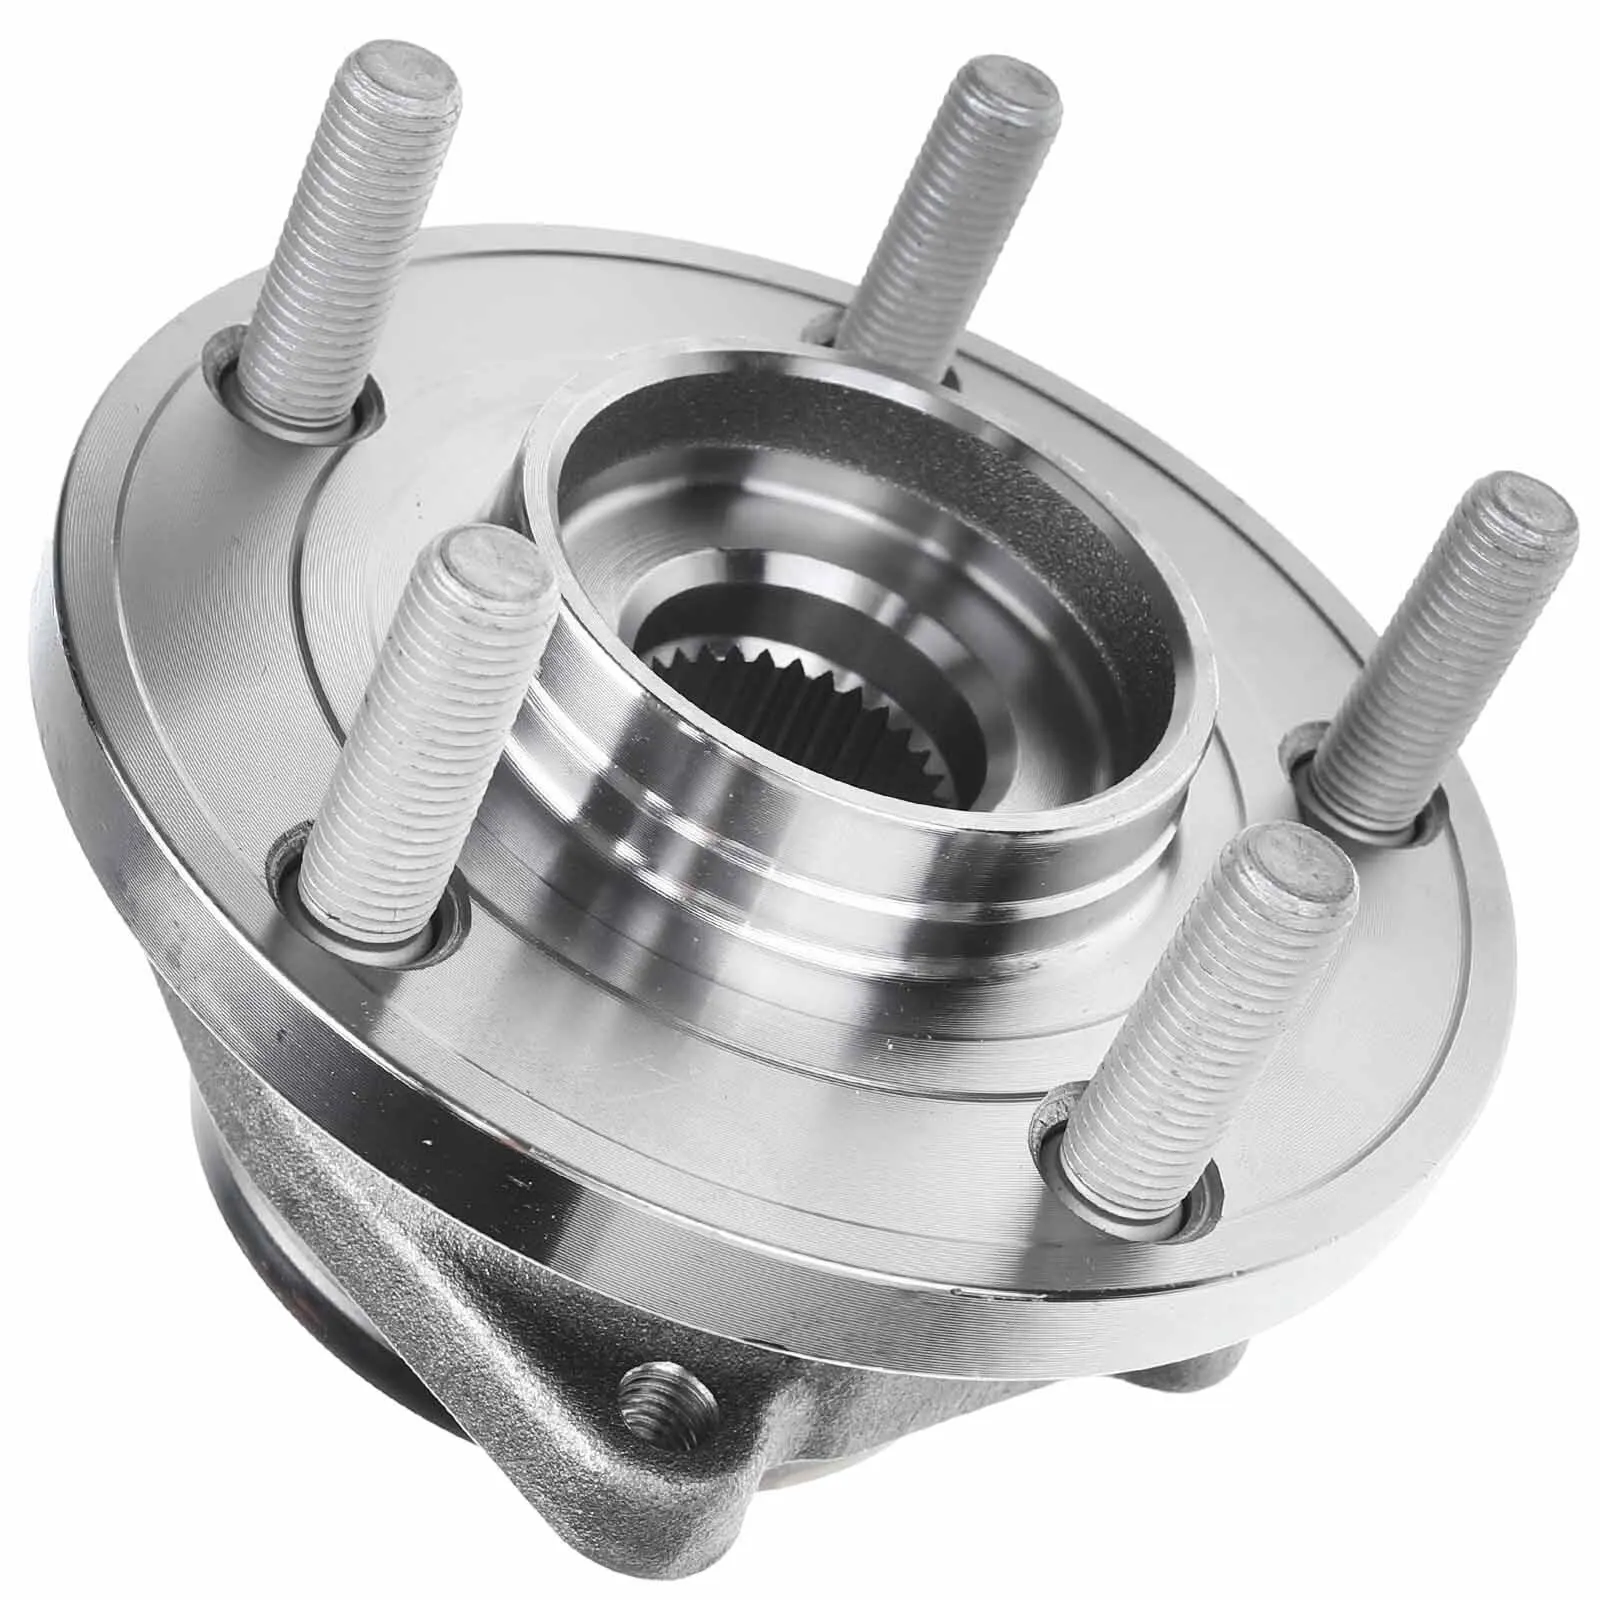 

A3 Wholesales 2x Front Wheel Hub Bearing Assembly for Chrysler Sebring 200 Dodge FWD/AWD